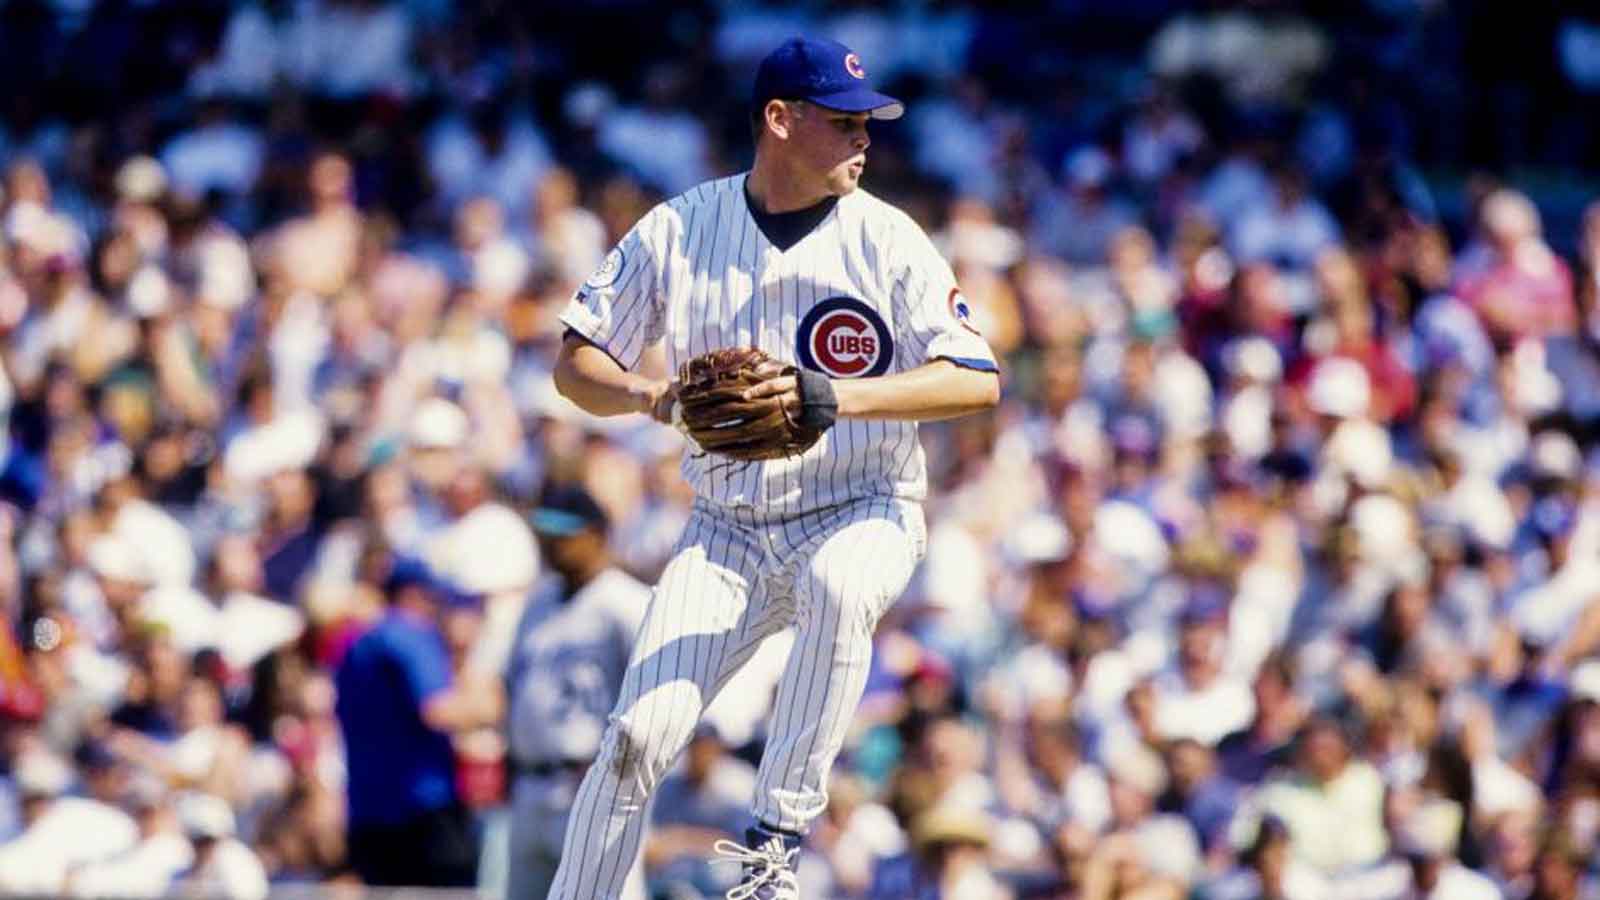 Images of Kerry Wood through the years